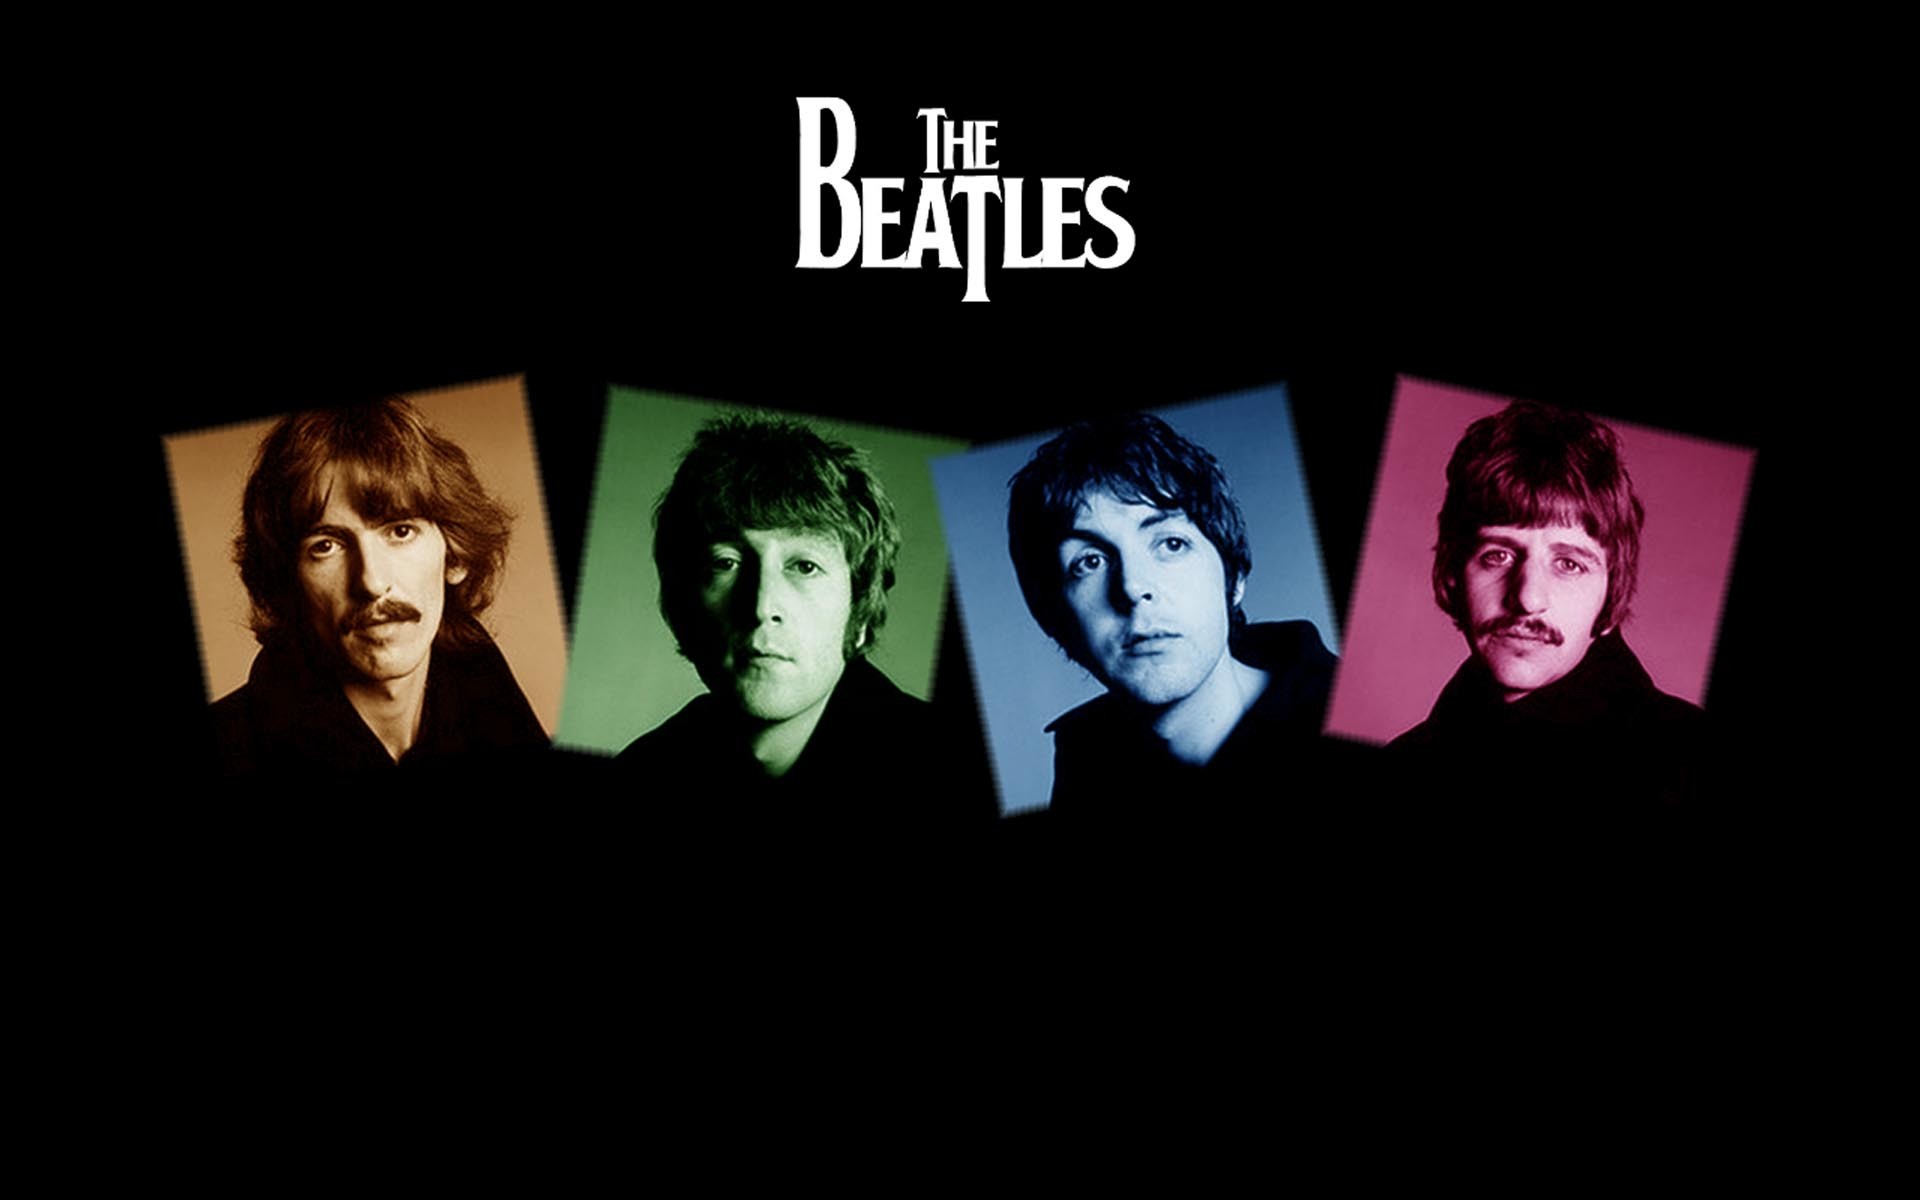 1920x1200 Download The Beatles Wallpaper High Quality WallpapersWallpaper 